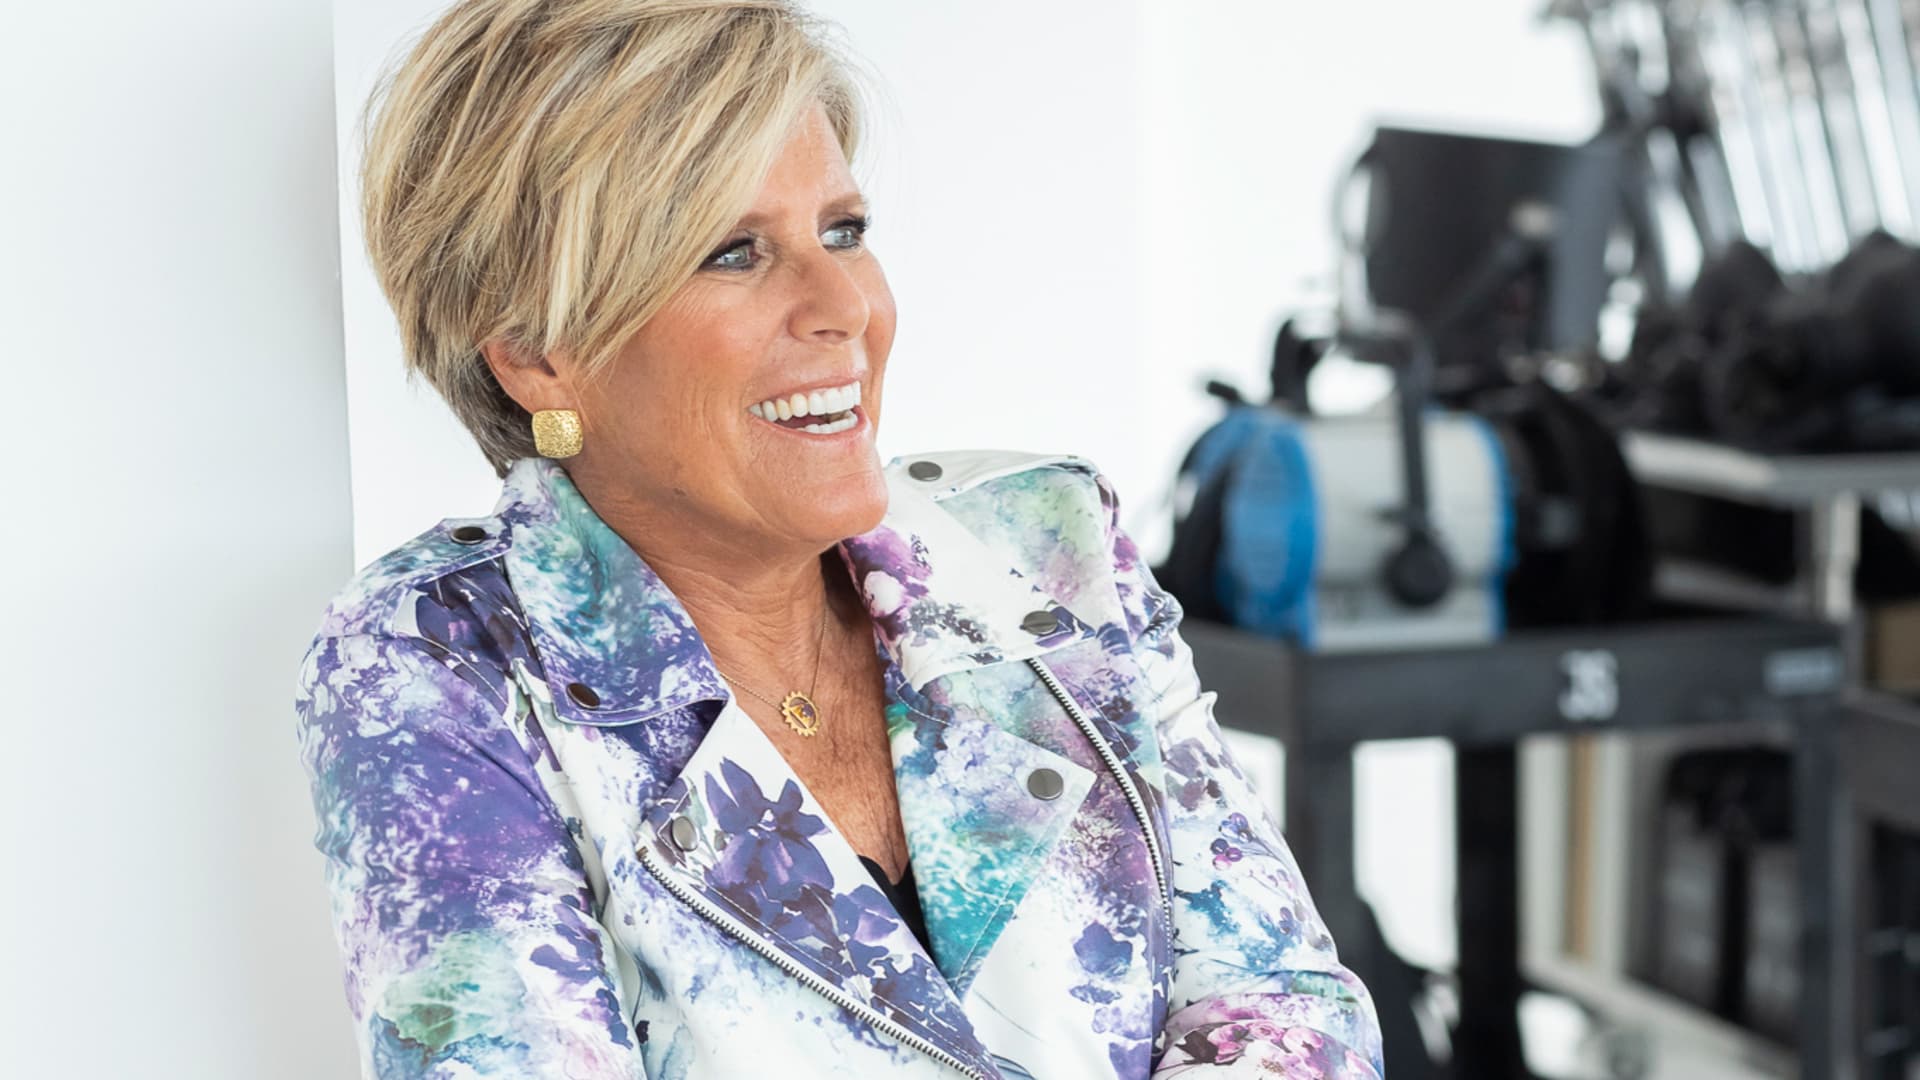 Suze Orman is staying conservative with her investments, shunning tech and buying T-bills